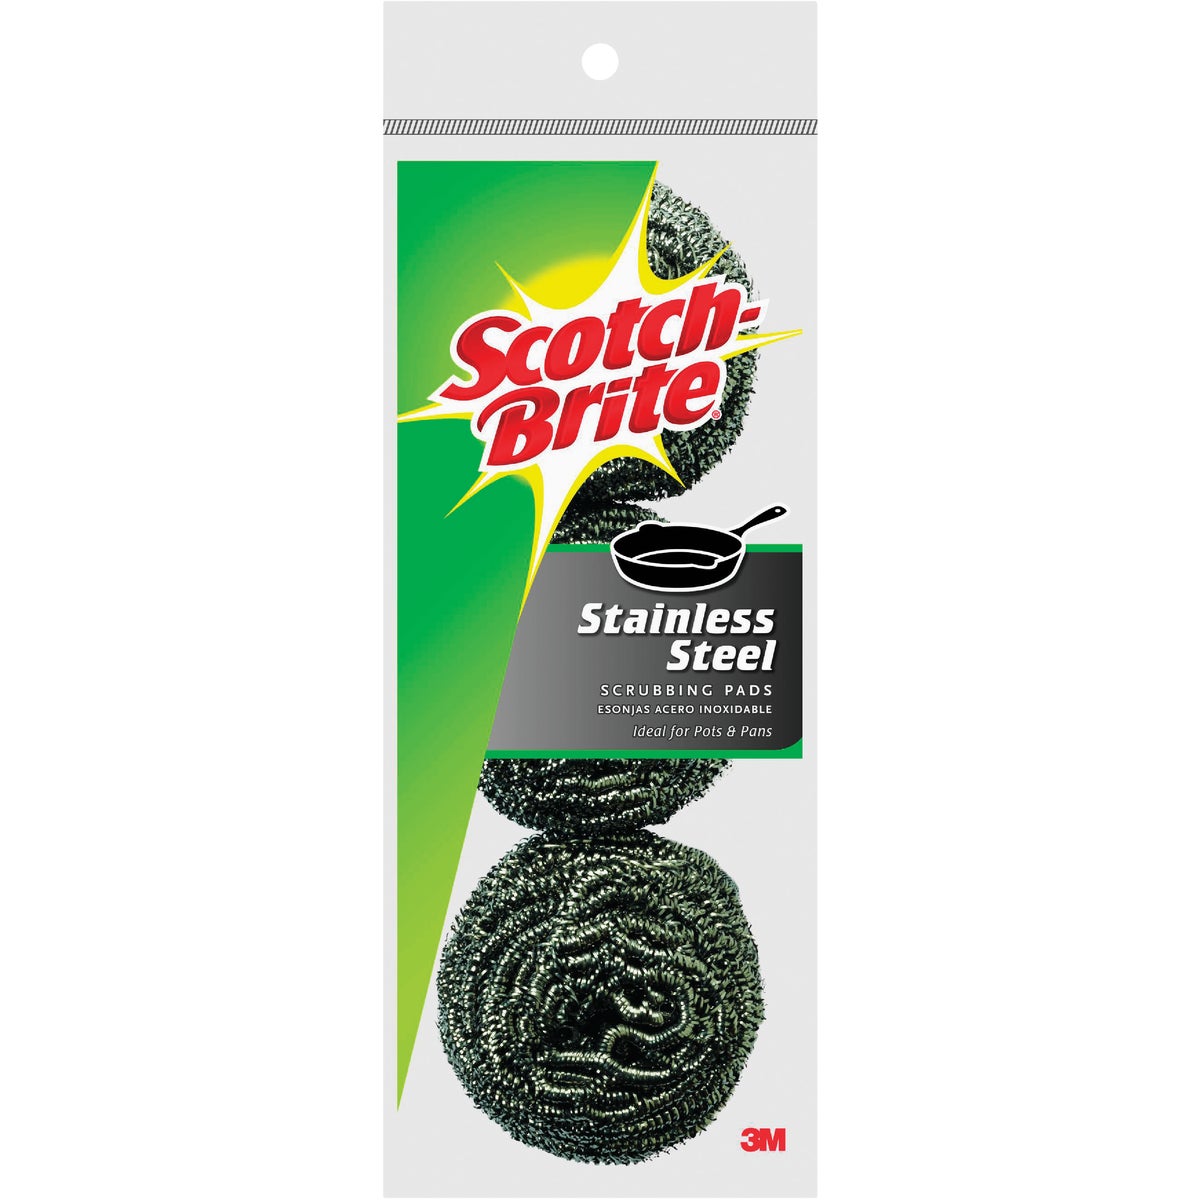 Scotch-Brite Stainless Steel Scouring Pad (3-Count)